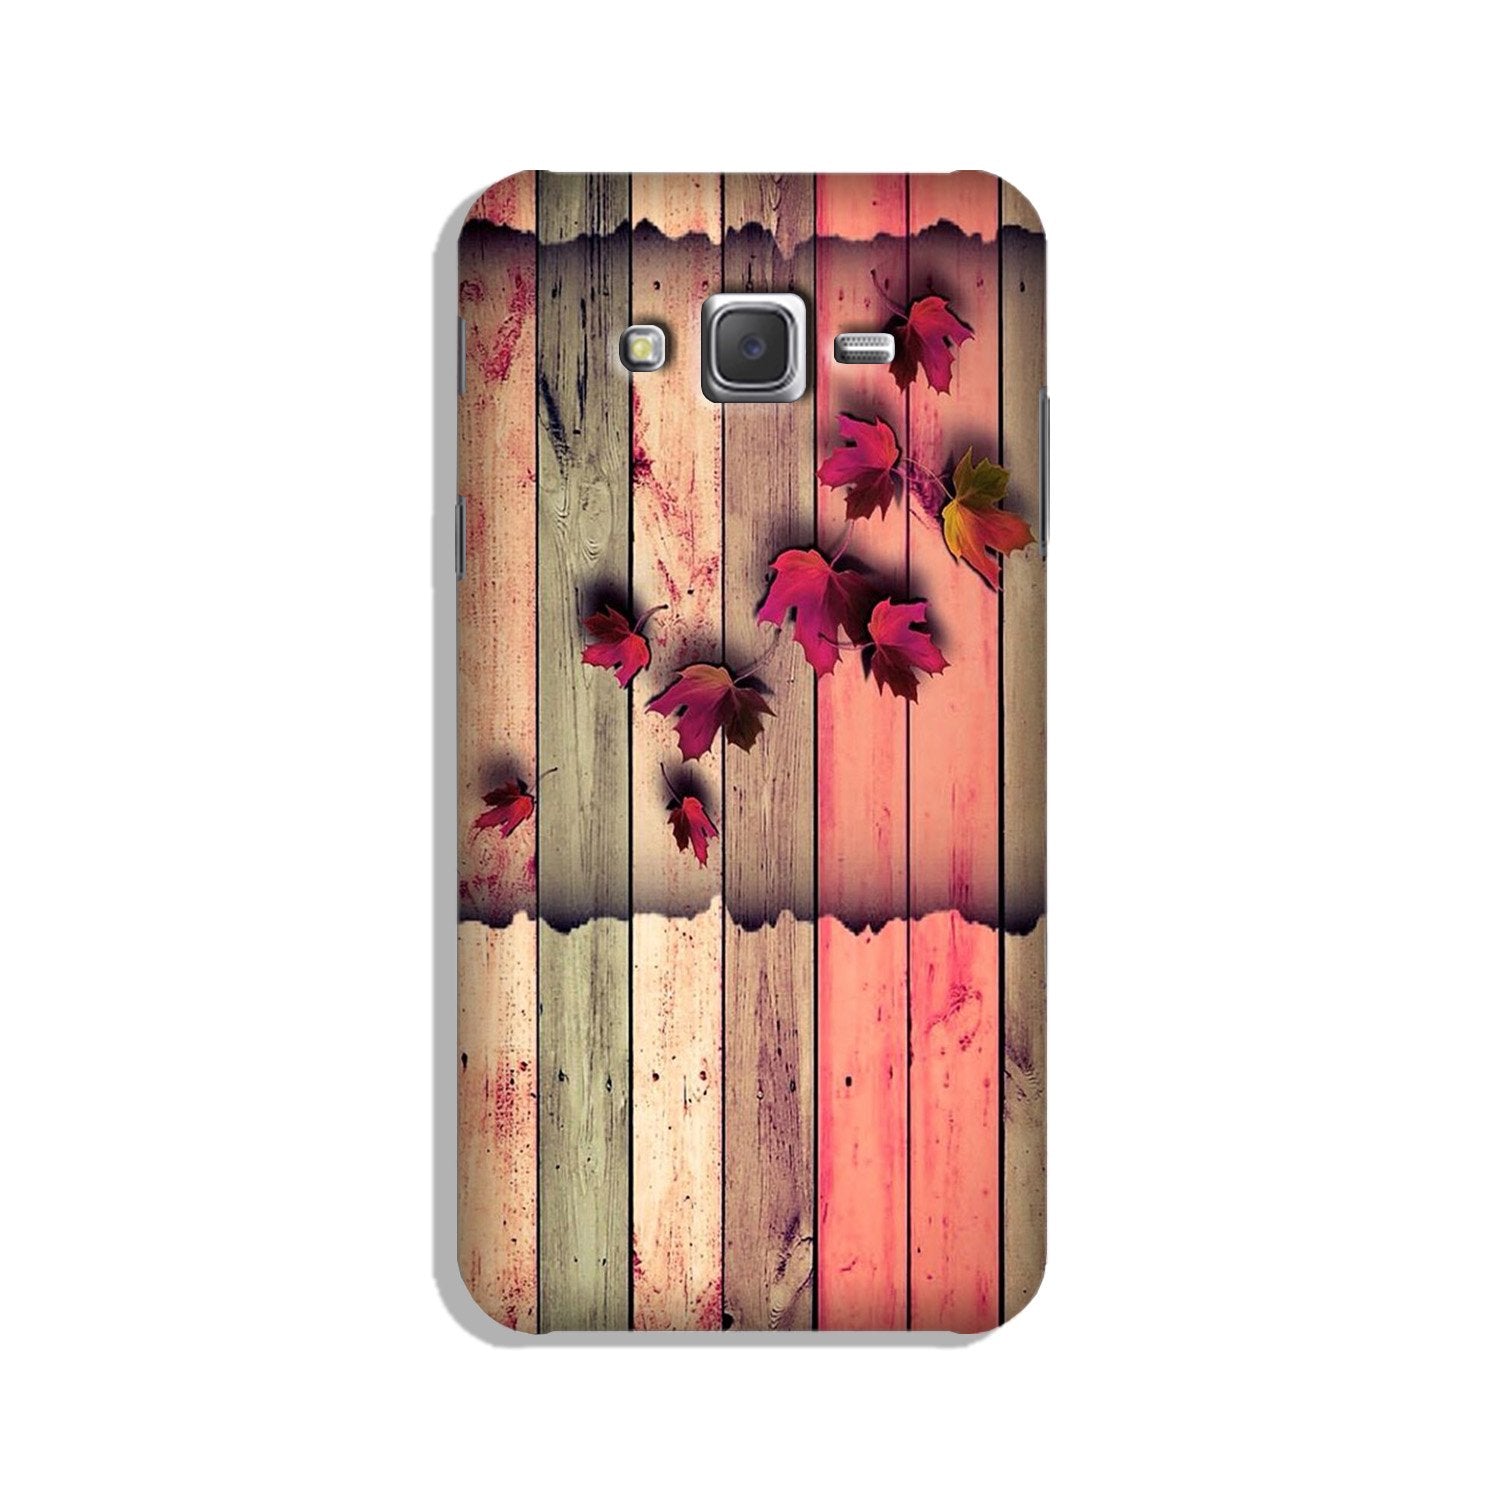 Wooden look2 Case for Galaxy J5 (2015)